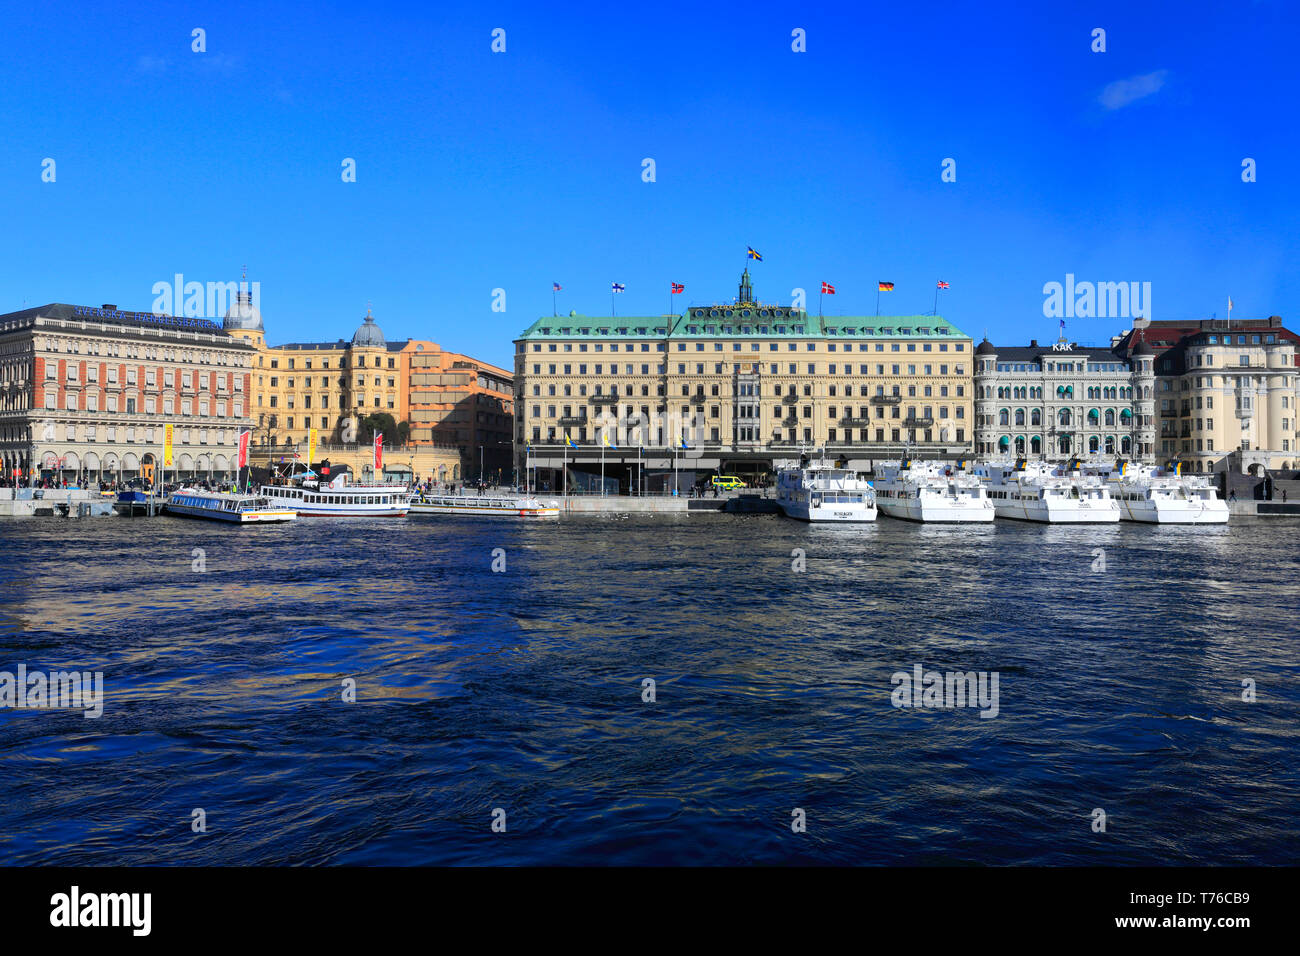 The Grand Hotel, Stockholm City, Sweden, Europe Stock Photo